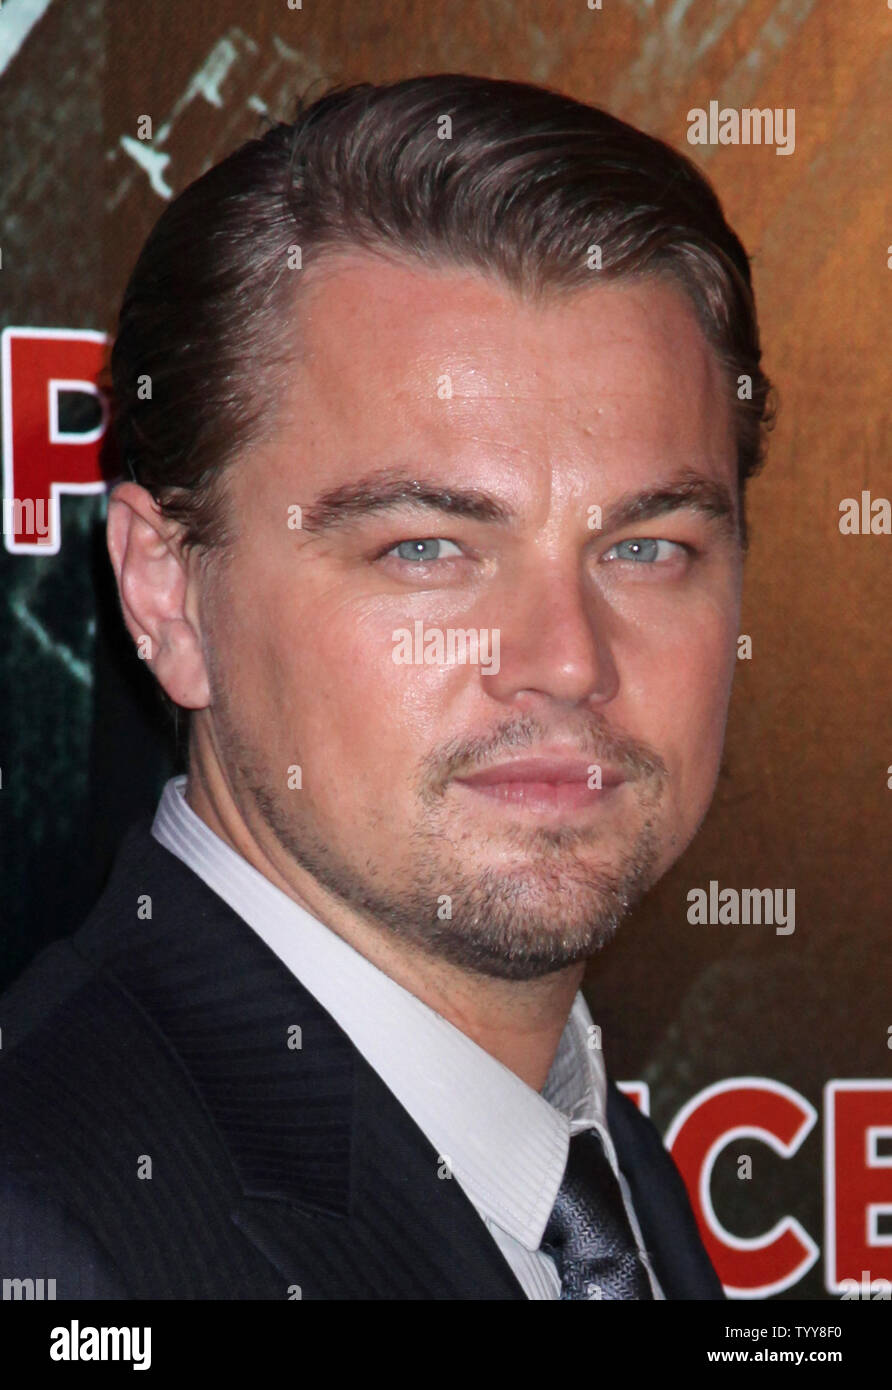 Leonardo Di Caprio arrives at the French premiere of the film 'Inception' in Paris on July 10, 2010.     UPI/David Silpa Stock Photo